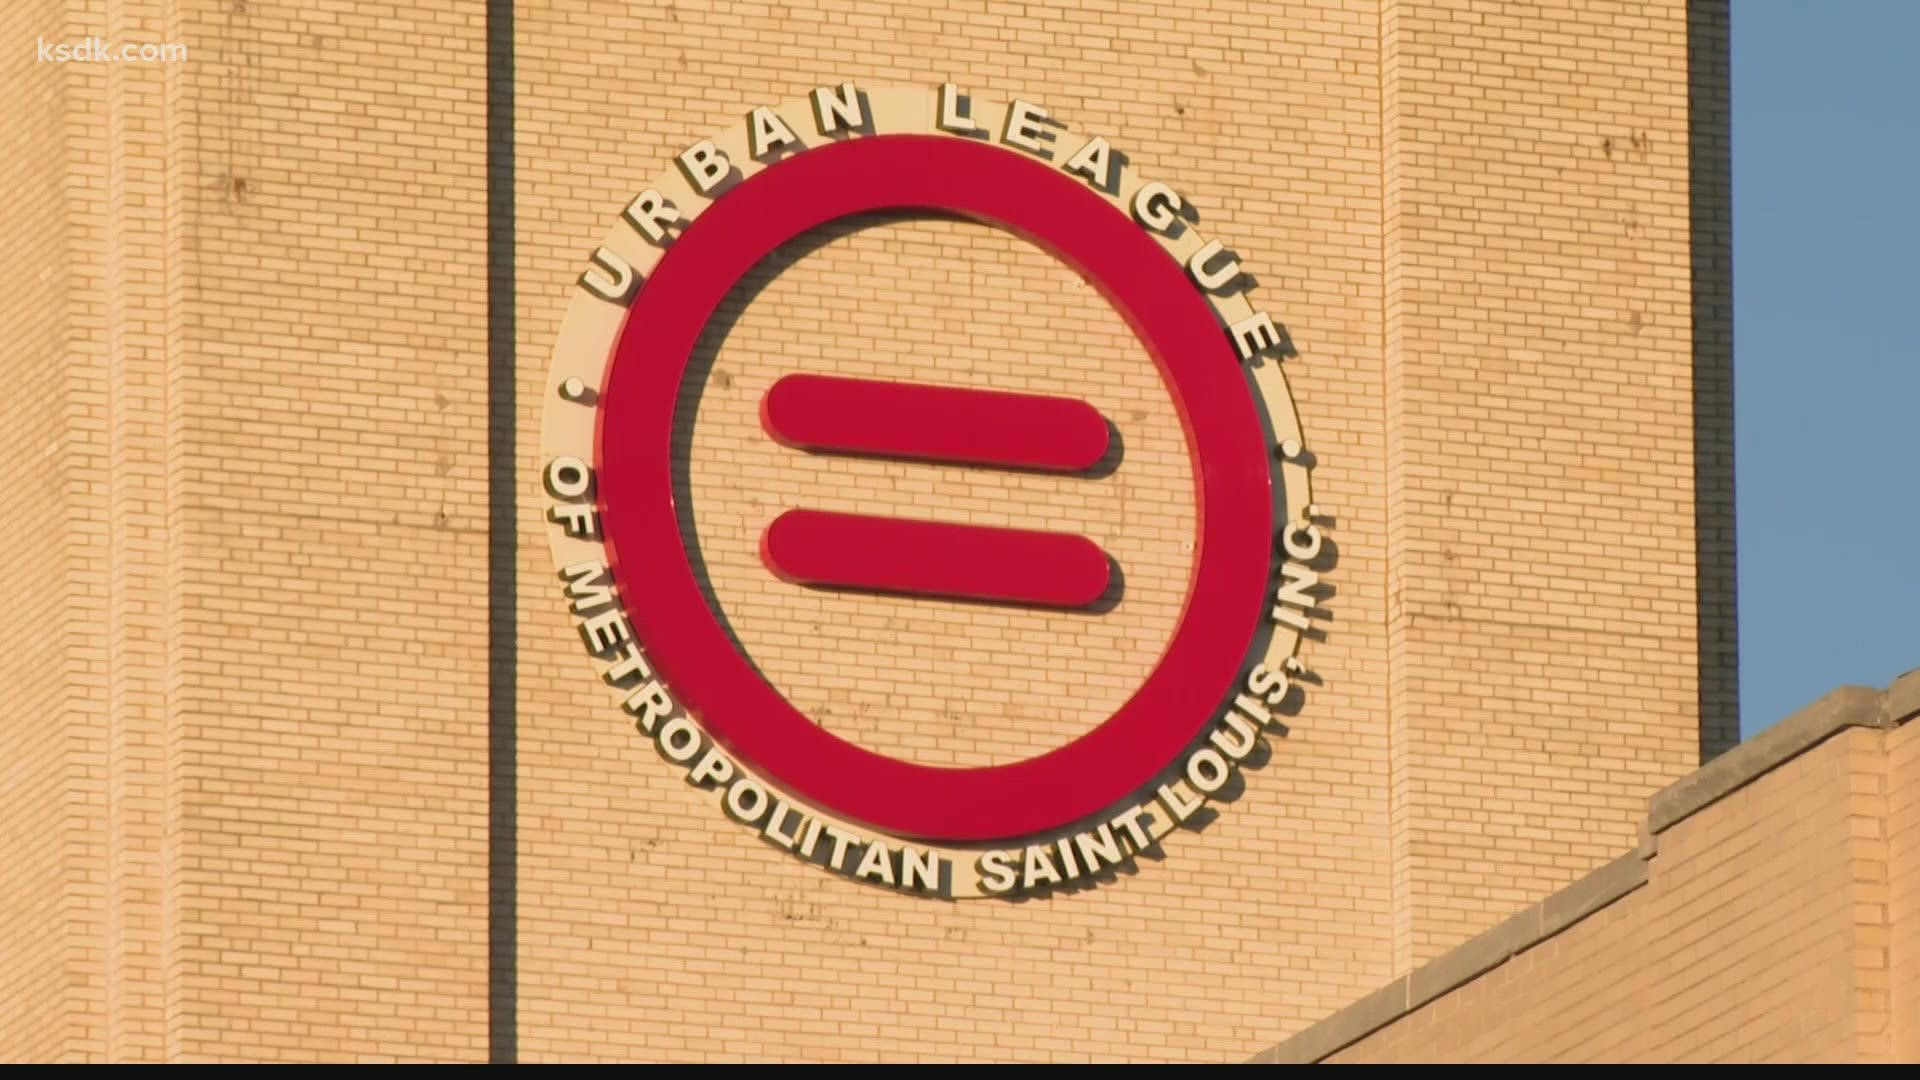 The Urban League of Metro St. Louis announced they would start appointment-based testing from 8 a.m. to 4 p.m. on Wednesday at 1408 N. Kingshighway Blvd.